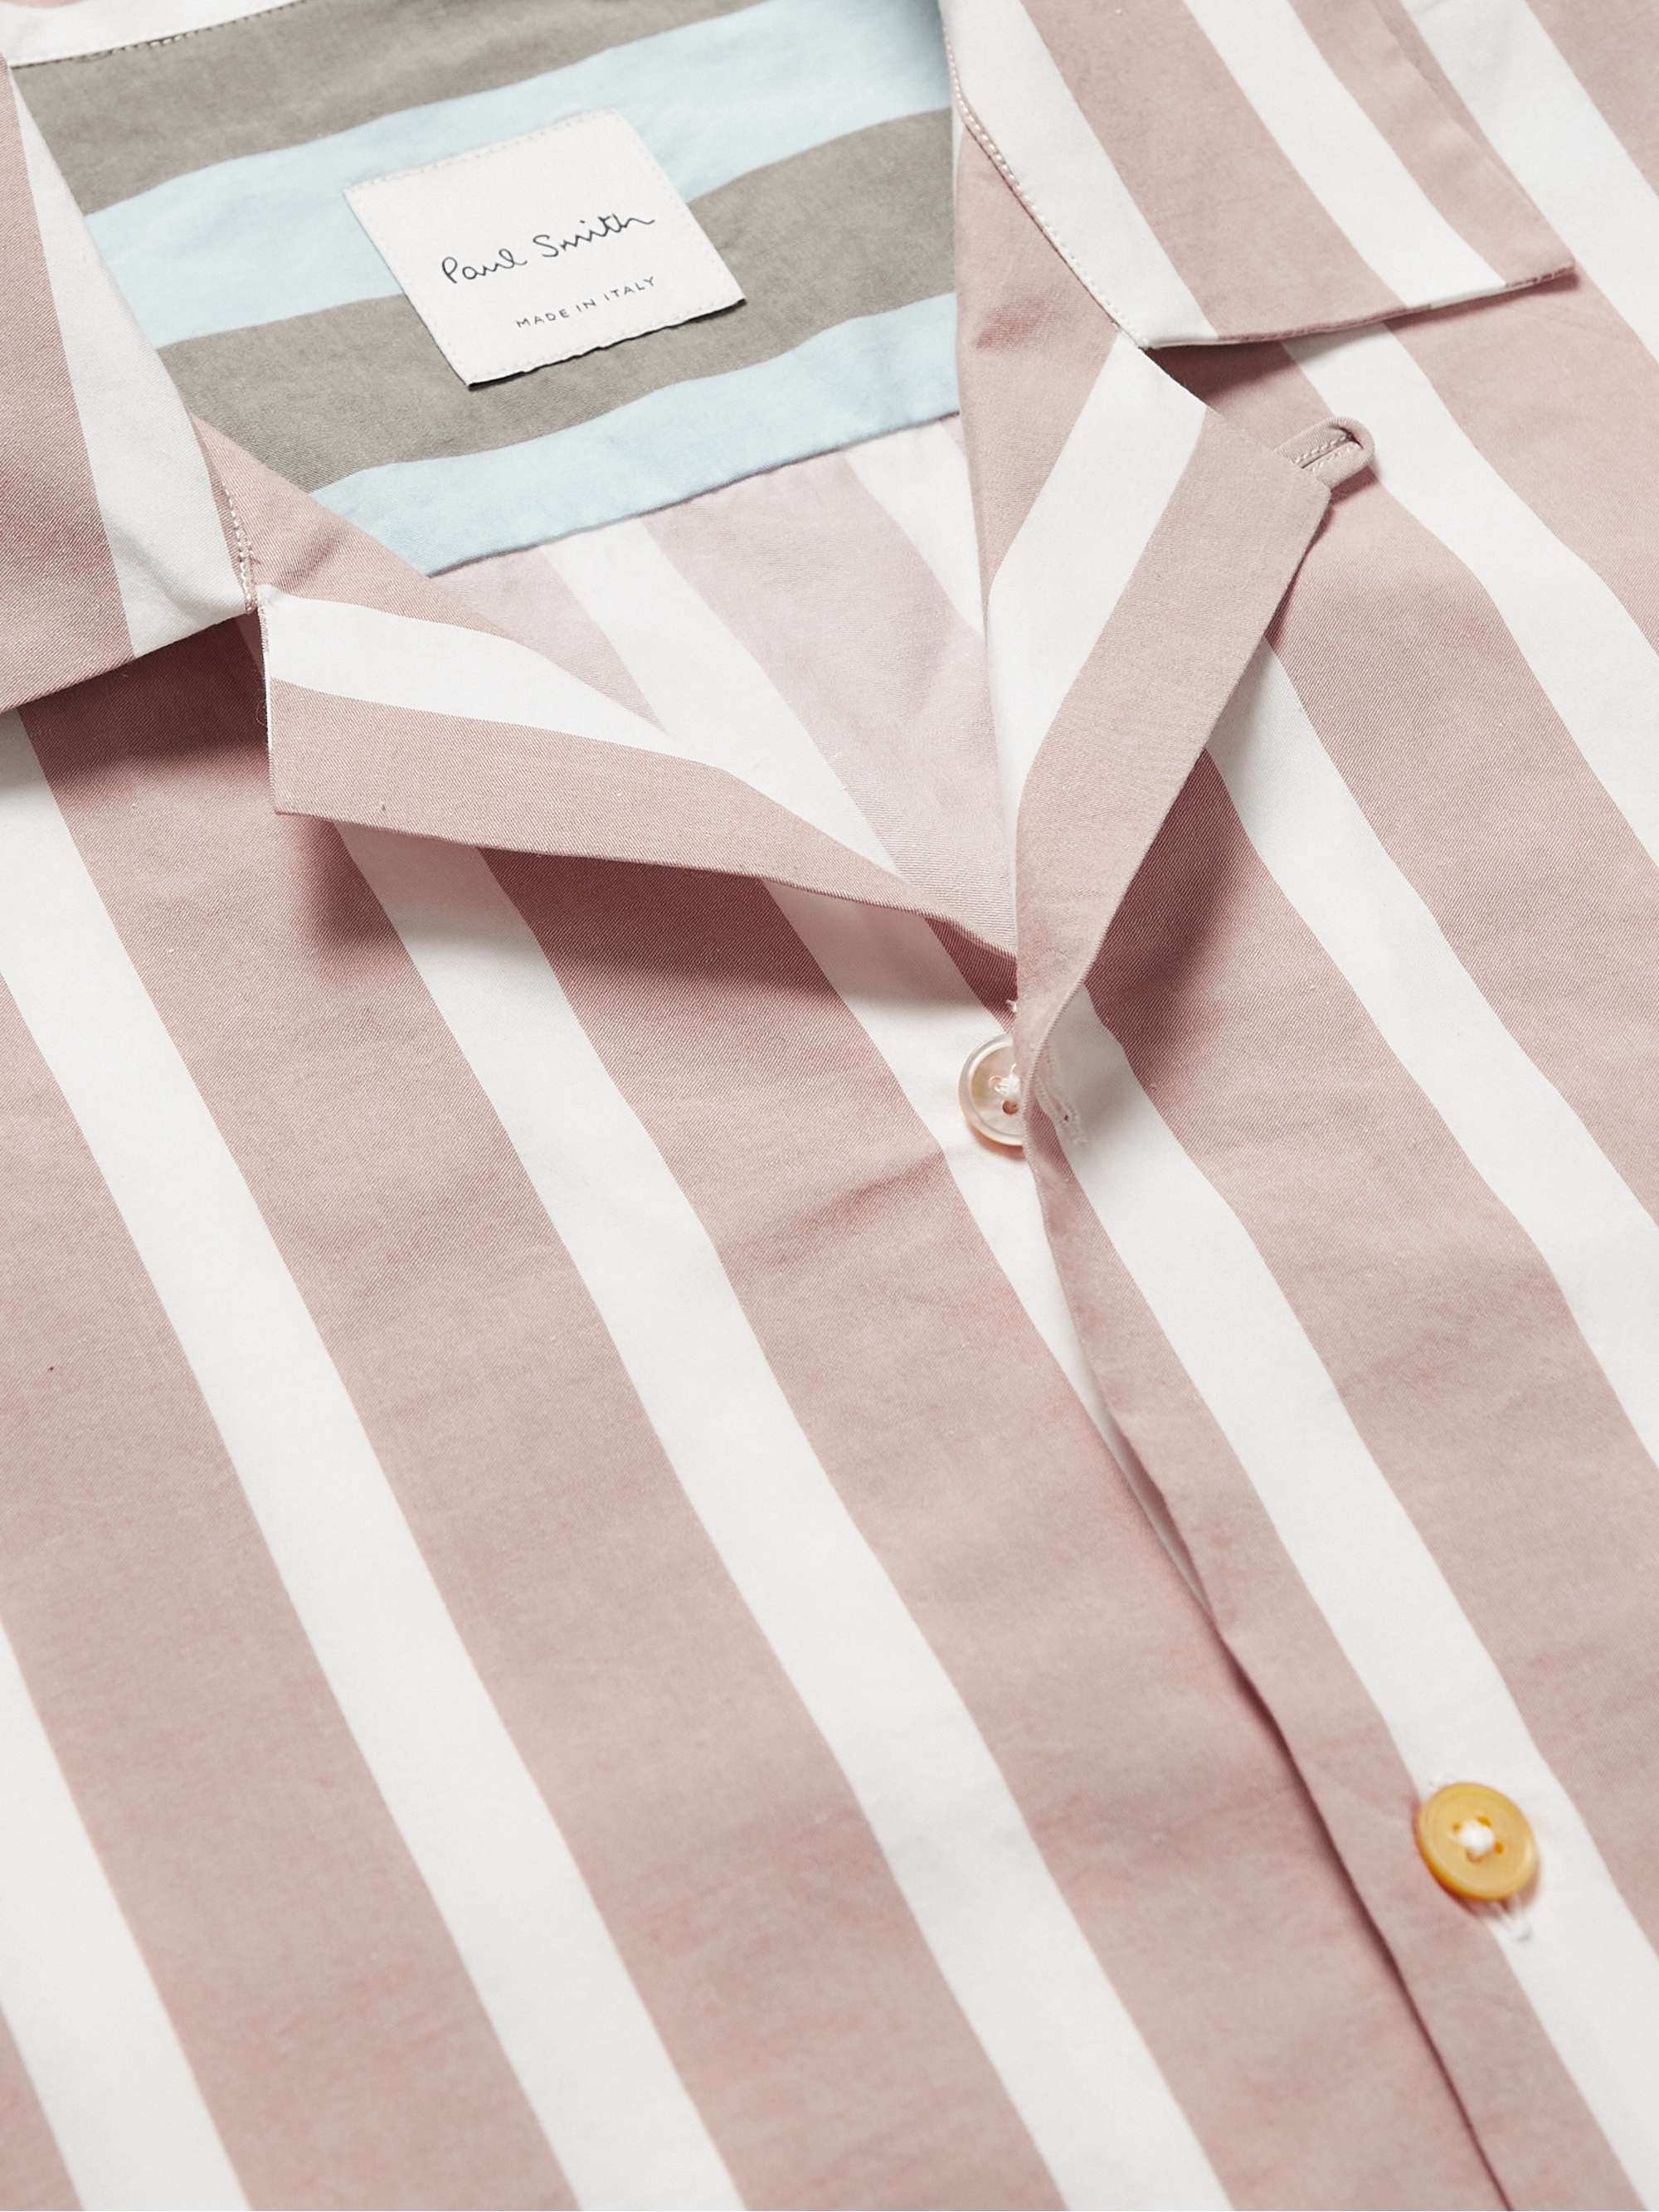 PAUL SMITH Convertible-Collar Striped Cotton and Lyocell-Blend Shirt